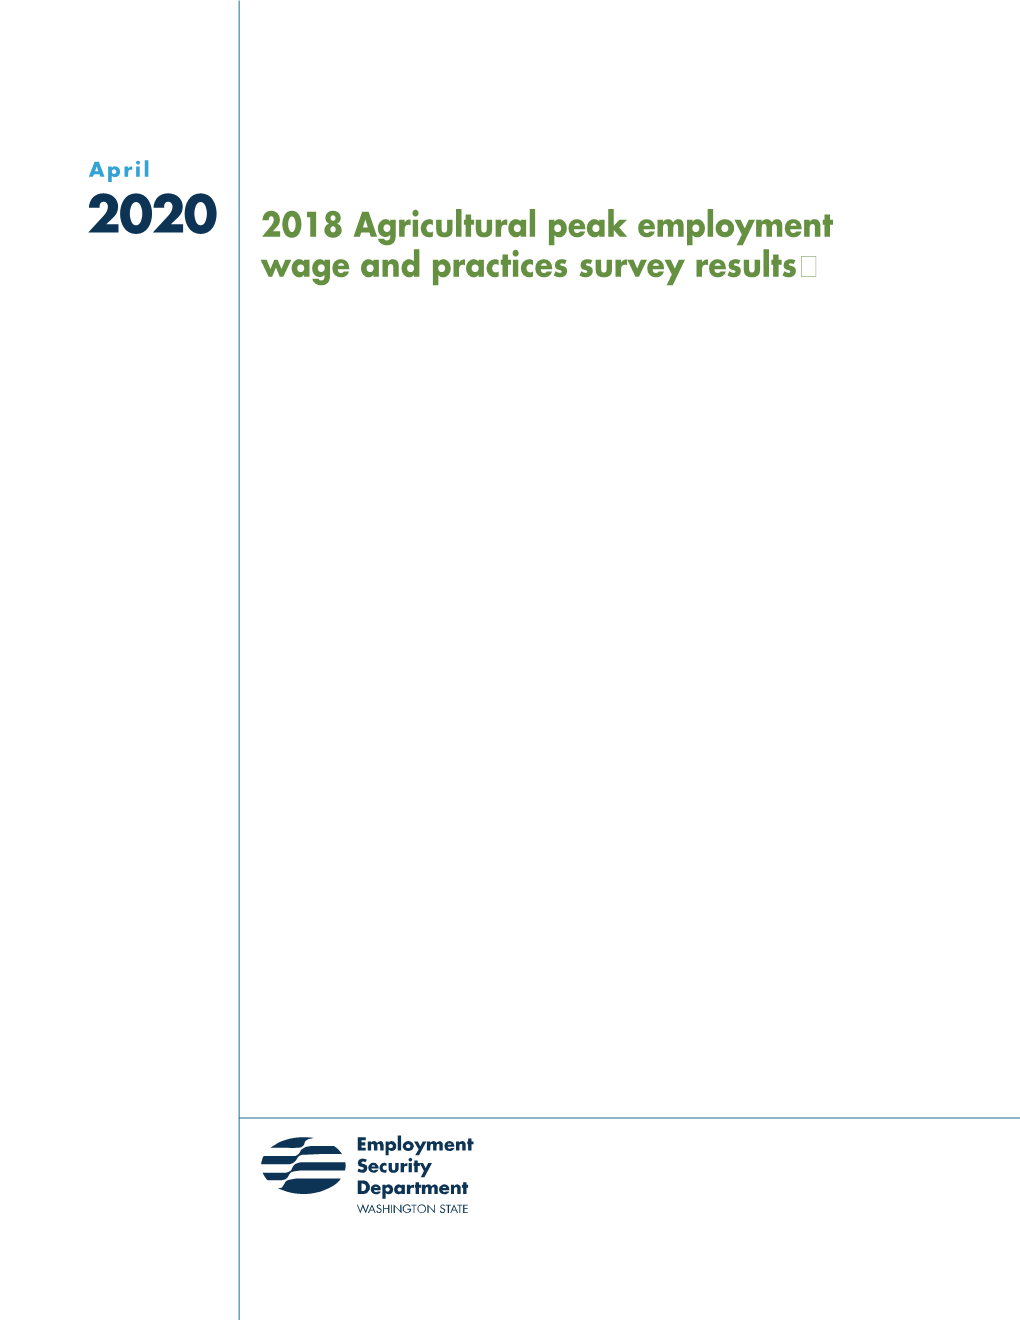 2018 Agricultural Peak Employment Wage and Practices Survey Results� 2018 Agricultural Peak Employment Wage and Practices Survey Results